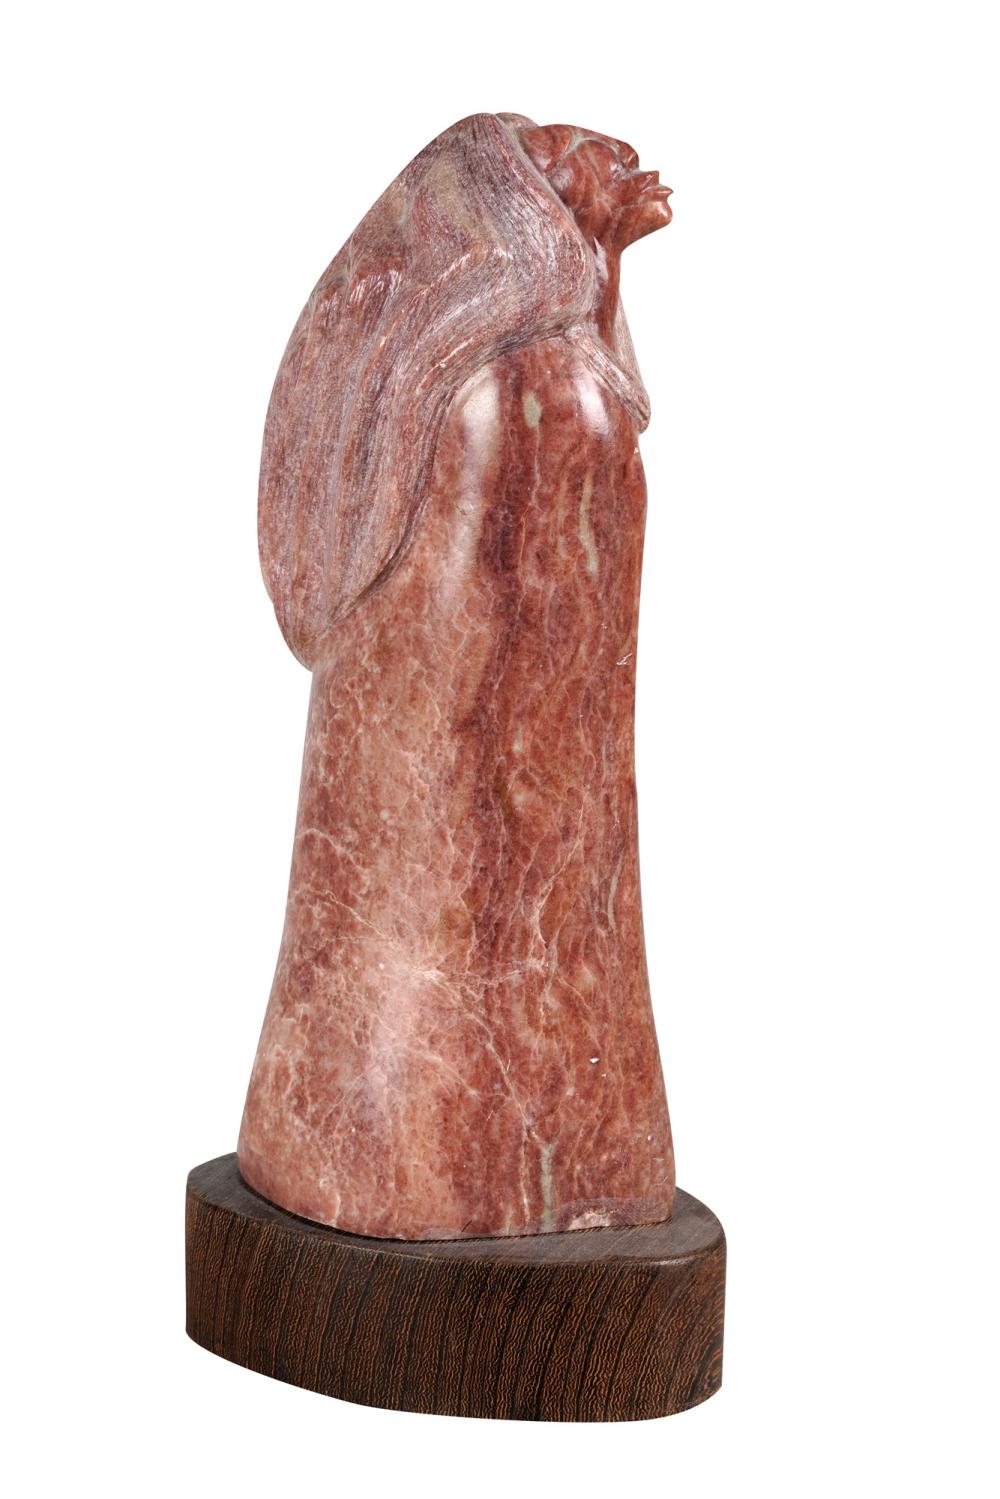 CARVED STONE FIGURE OF A NATIVE 33616b